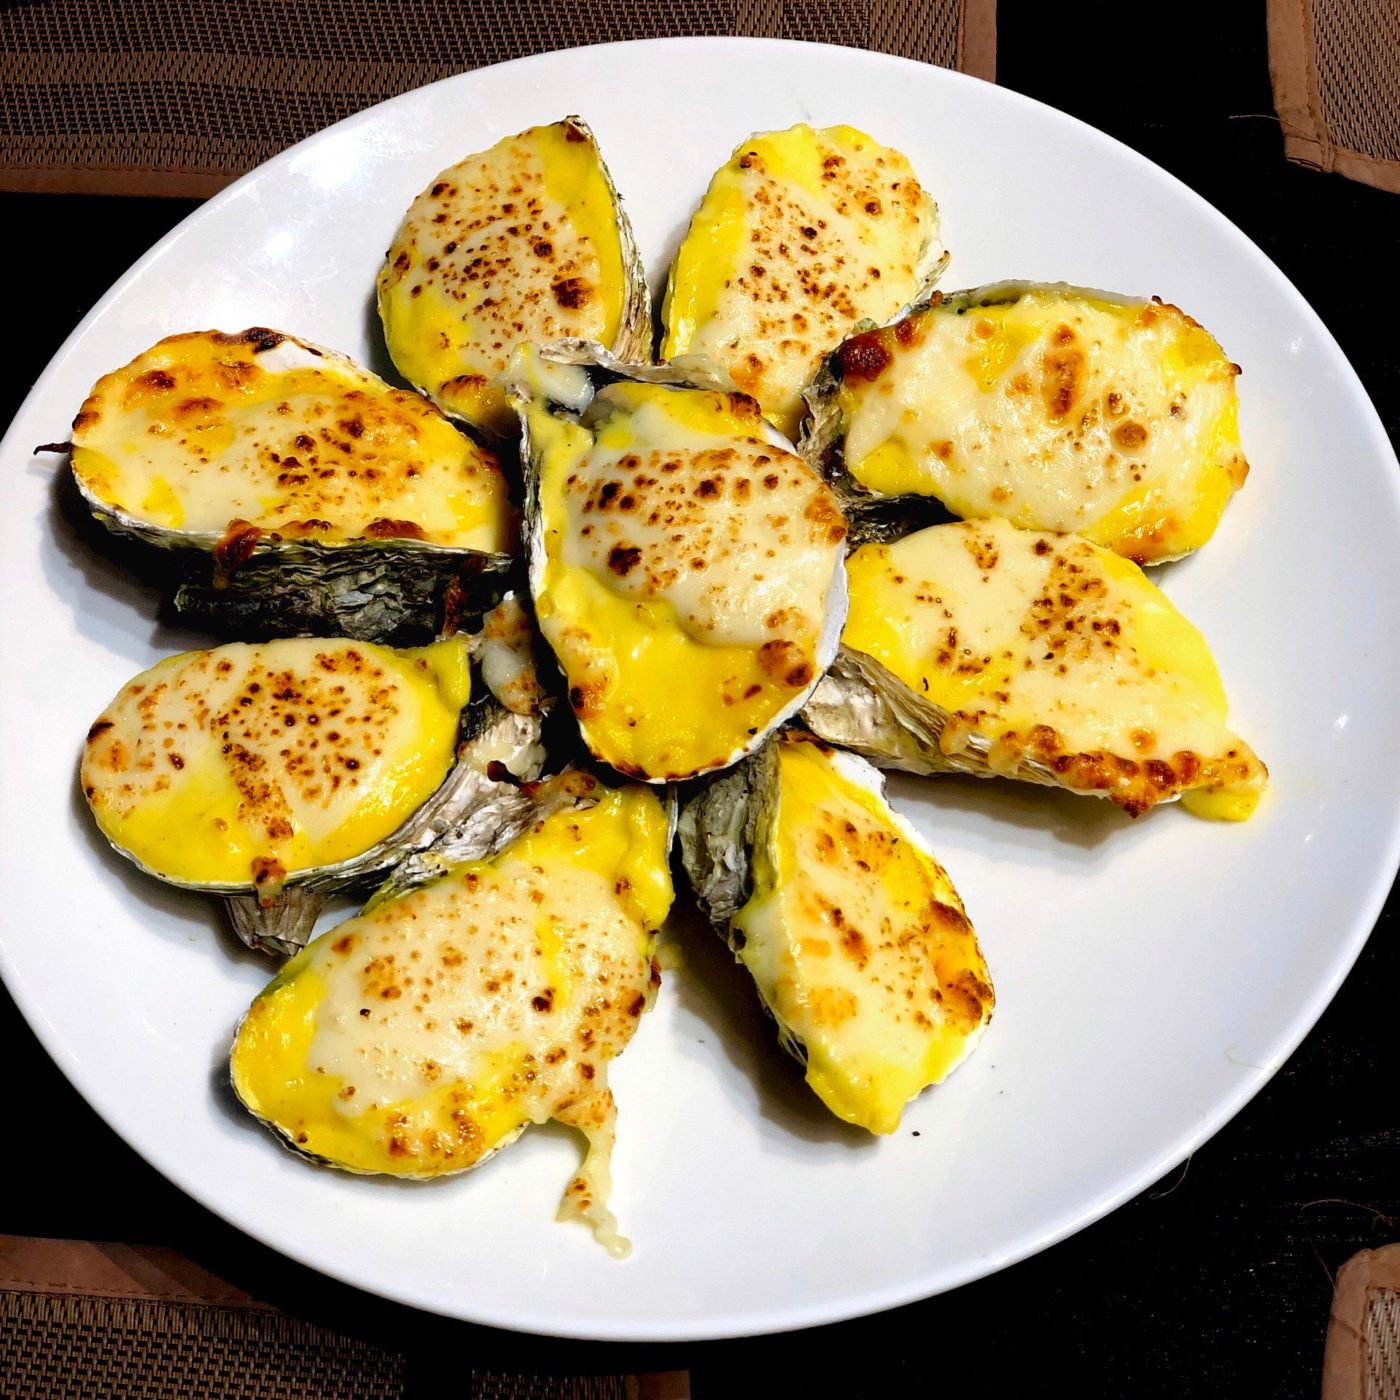 Grilled oysters with cheese